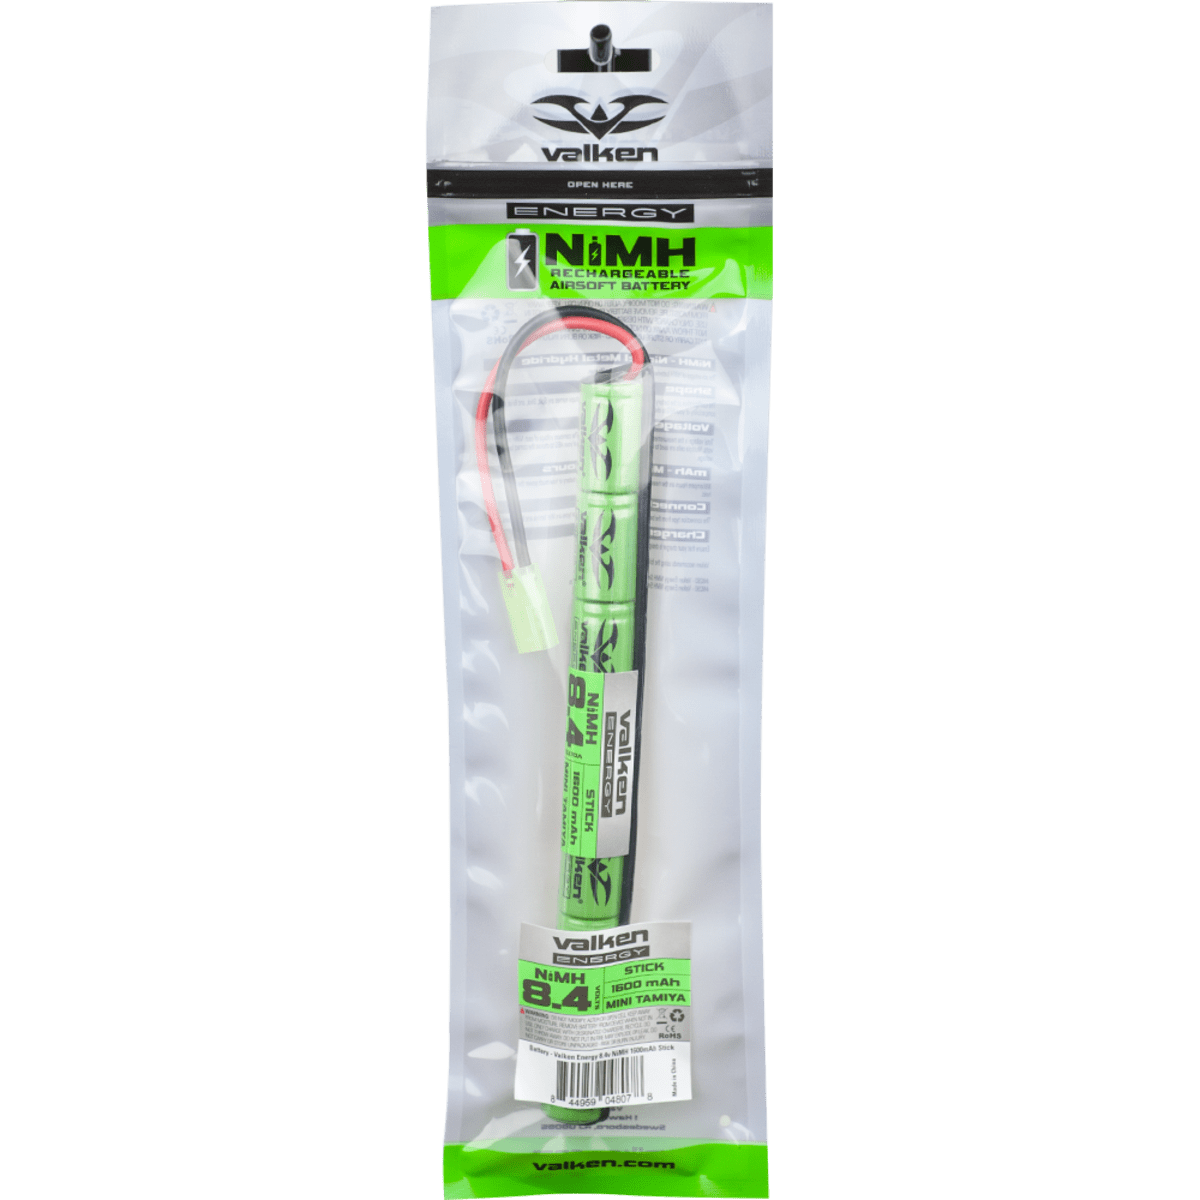 VALKEN BATTERY - NIMH 8.4V 1600MAH MINI STICK STYLE - Eminent Paintball And Airsoft